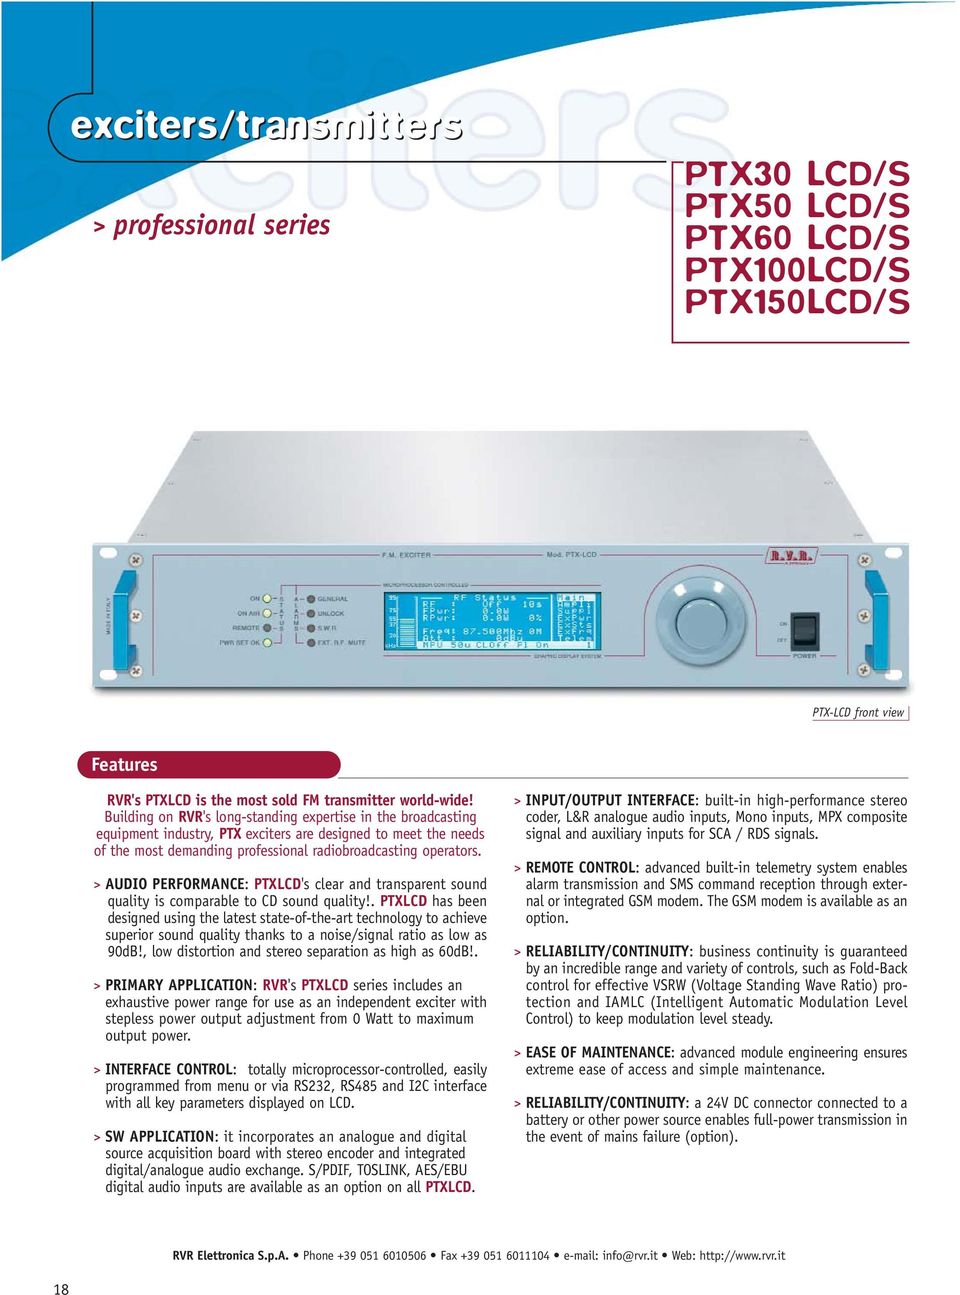 > AUDIO PERFORMANCE: PTXLCD's clear and transparent sound quality is comparable to CD sound quality!